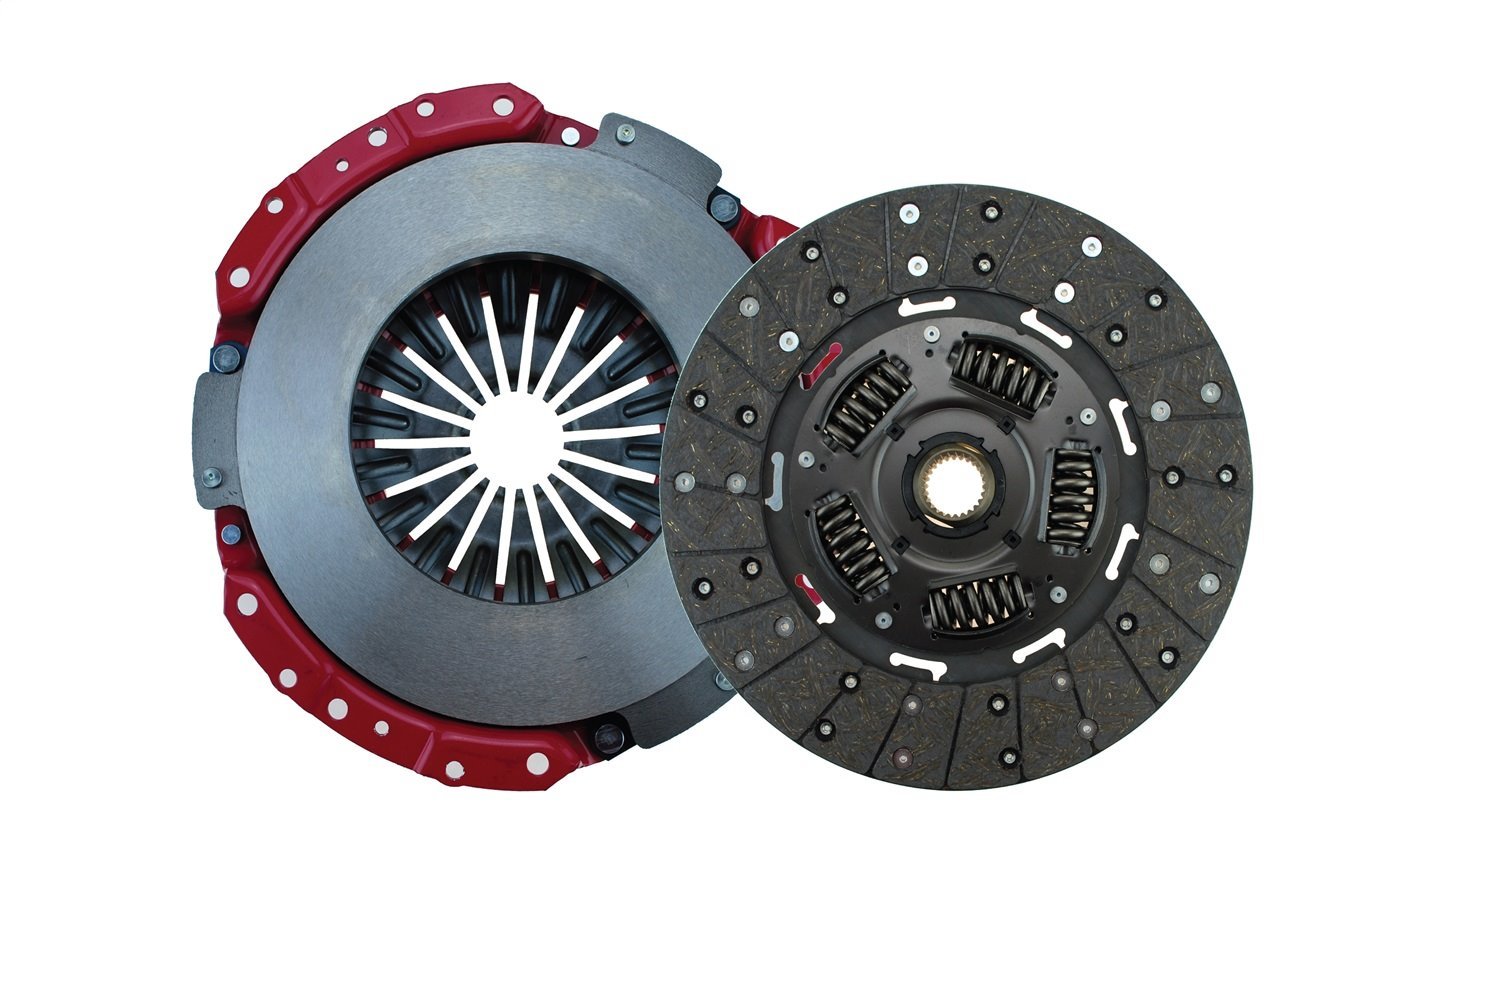 Premium OEM Replacement Clutch Kit 2005-10 Ford Mustang 4.6L (6-Bolt Flywheel)